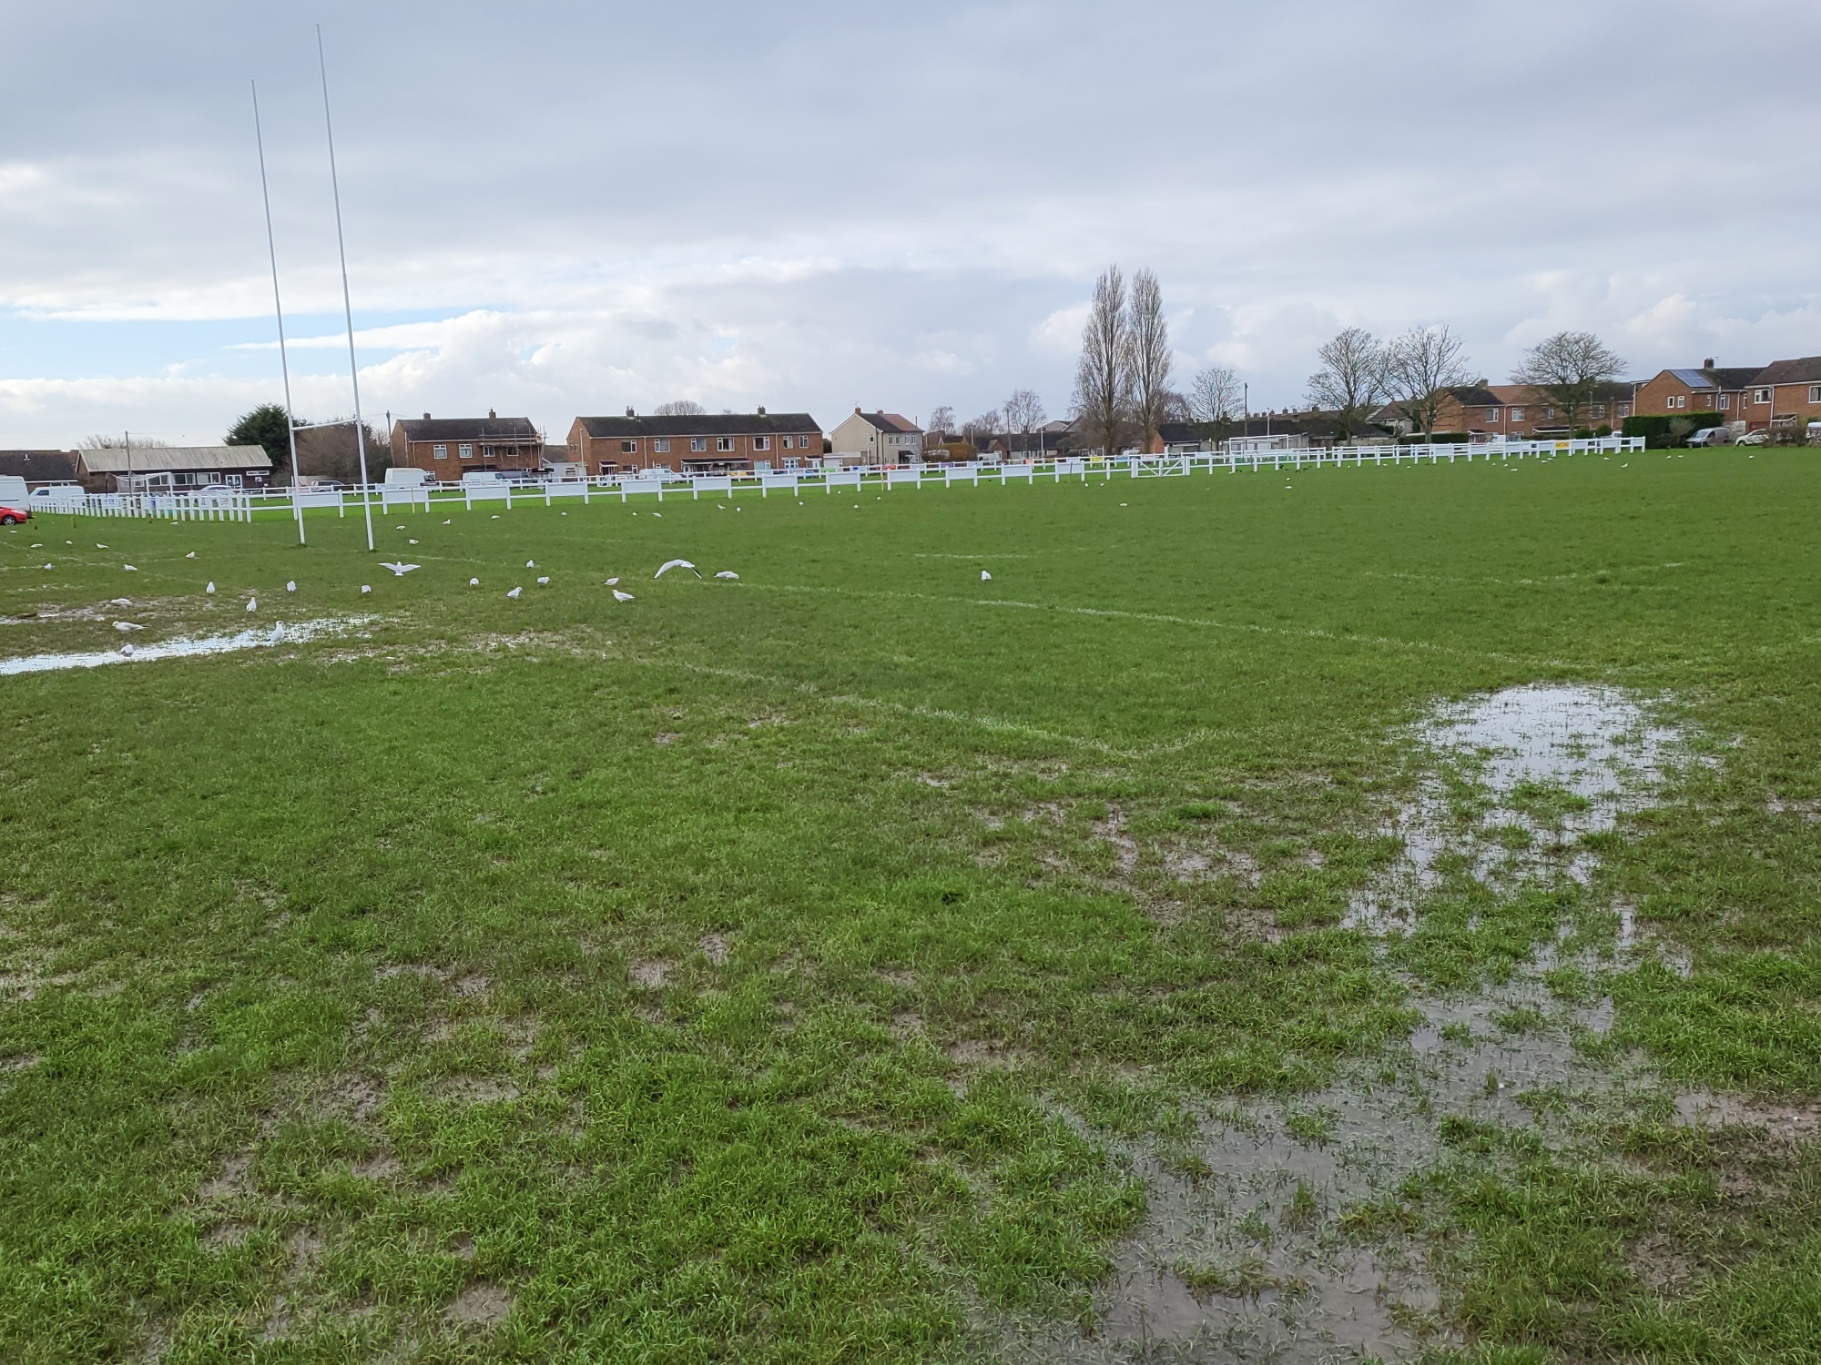 Swamp conditions at The Vale...